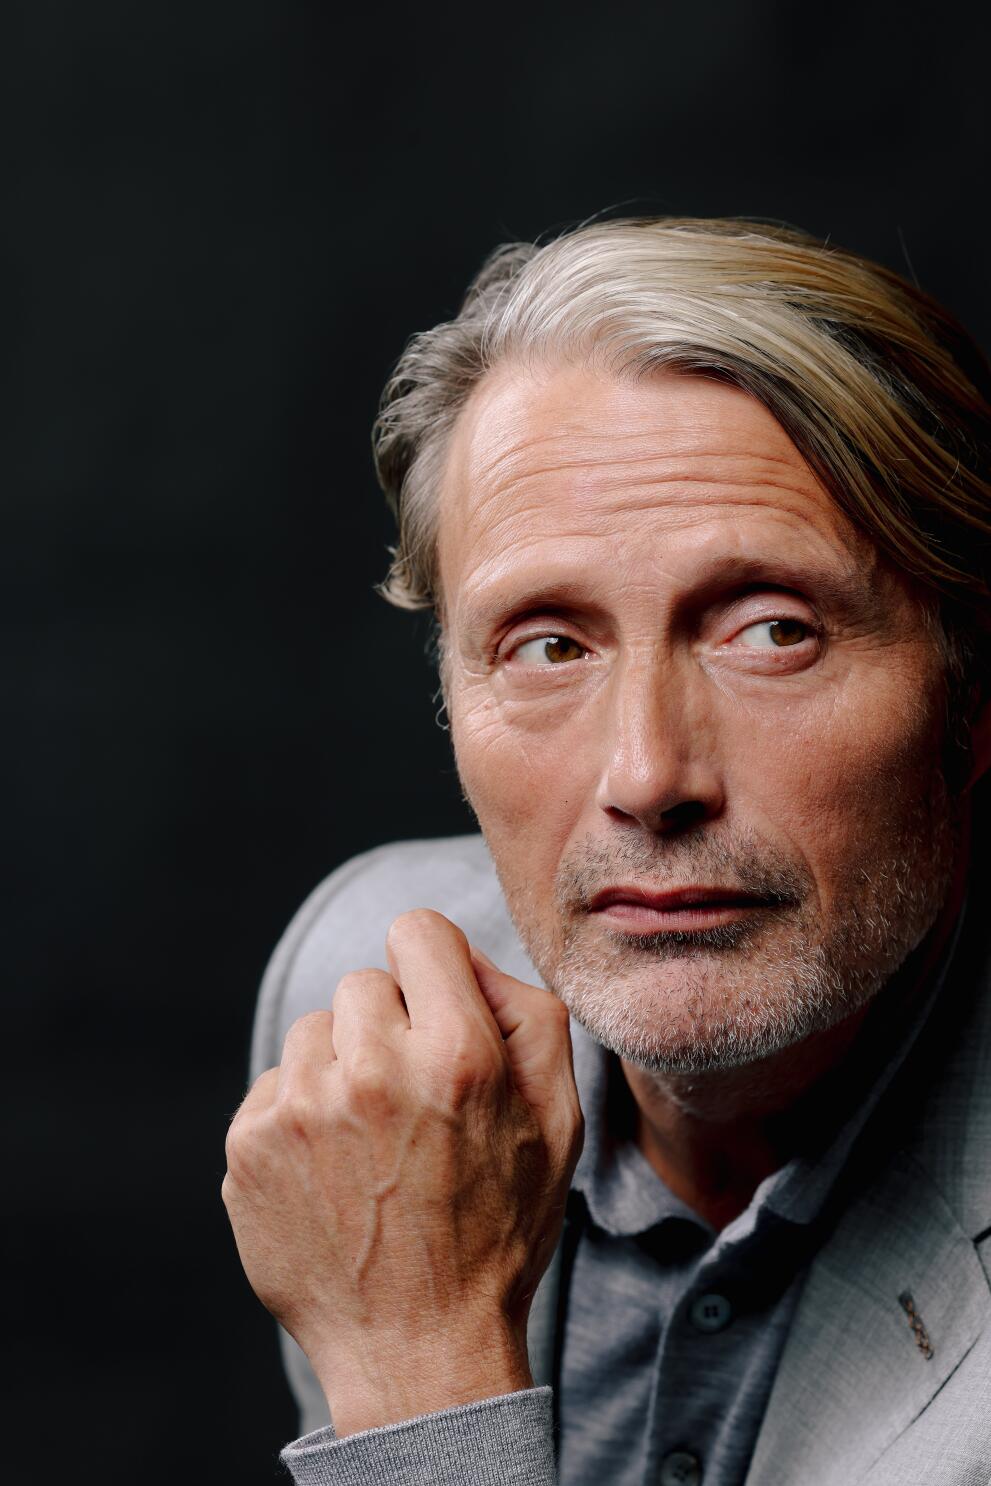 The Promised Land' Review: Mads Mikkelsen Anchors a Rip-Roaring Epic